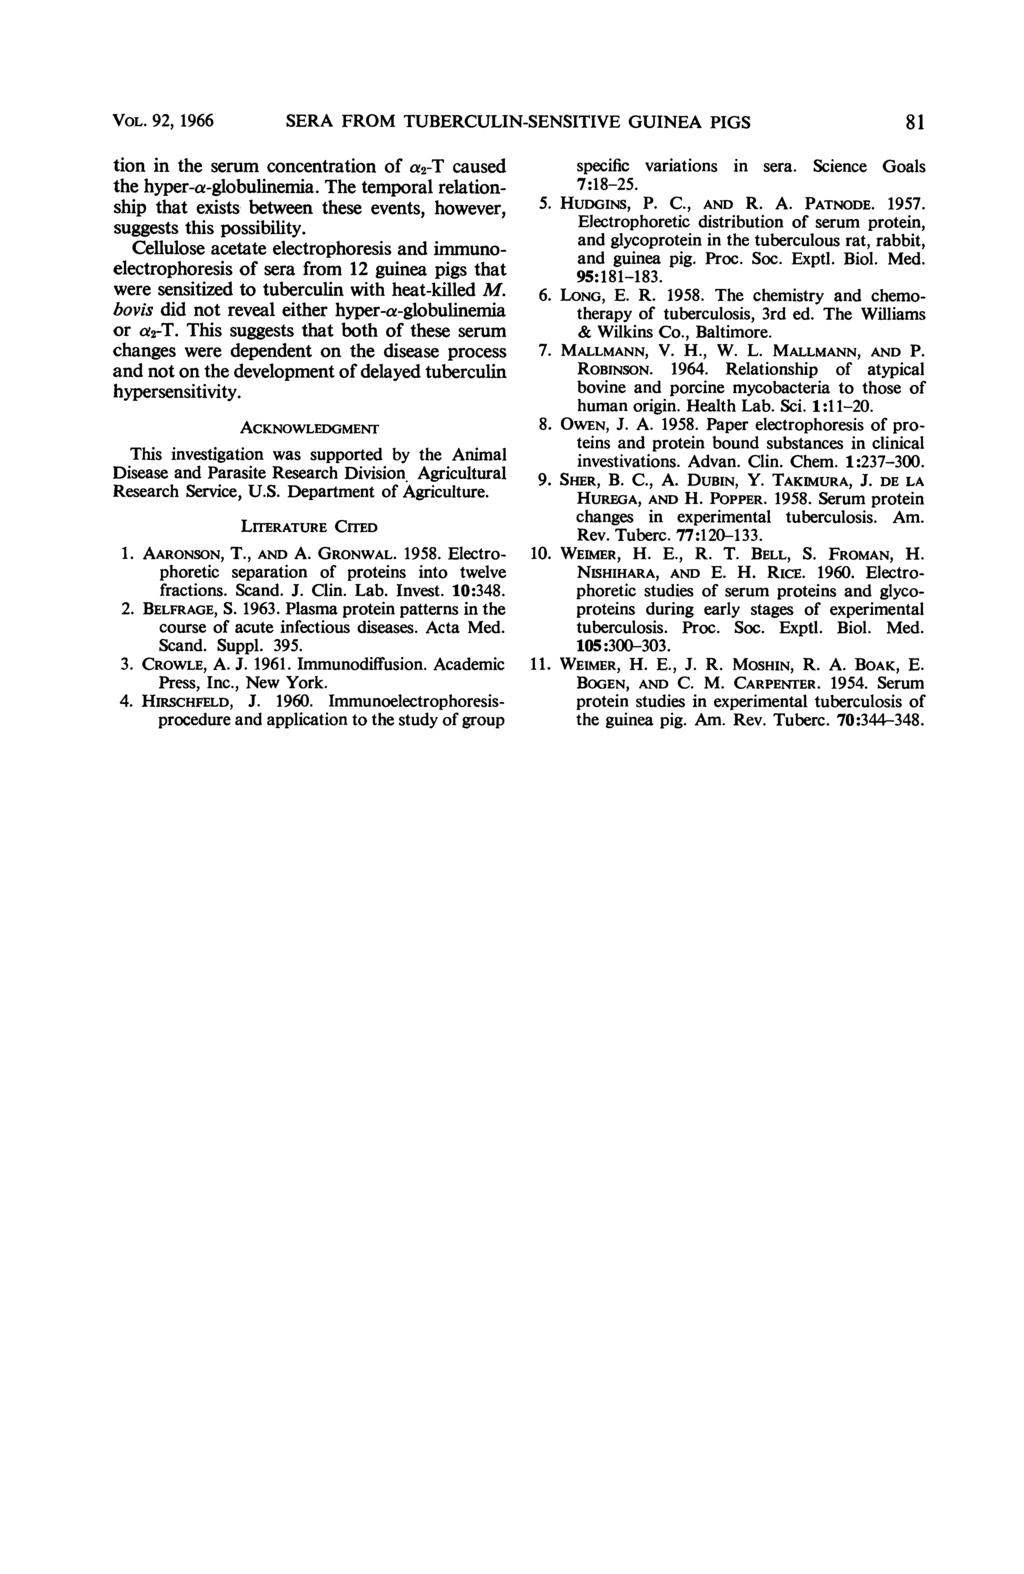 VOL. 92, 1966 SERA FROM TUBERCULIN-SENSITIVE GUINEA PIGS 81 tion in the serum concentration of a2-t caused the hyper-a-globulinemia.